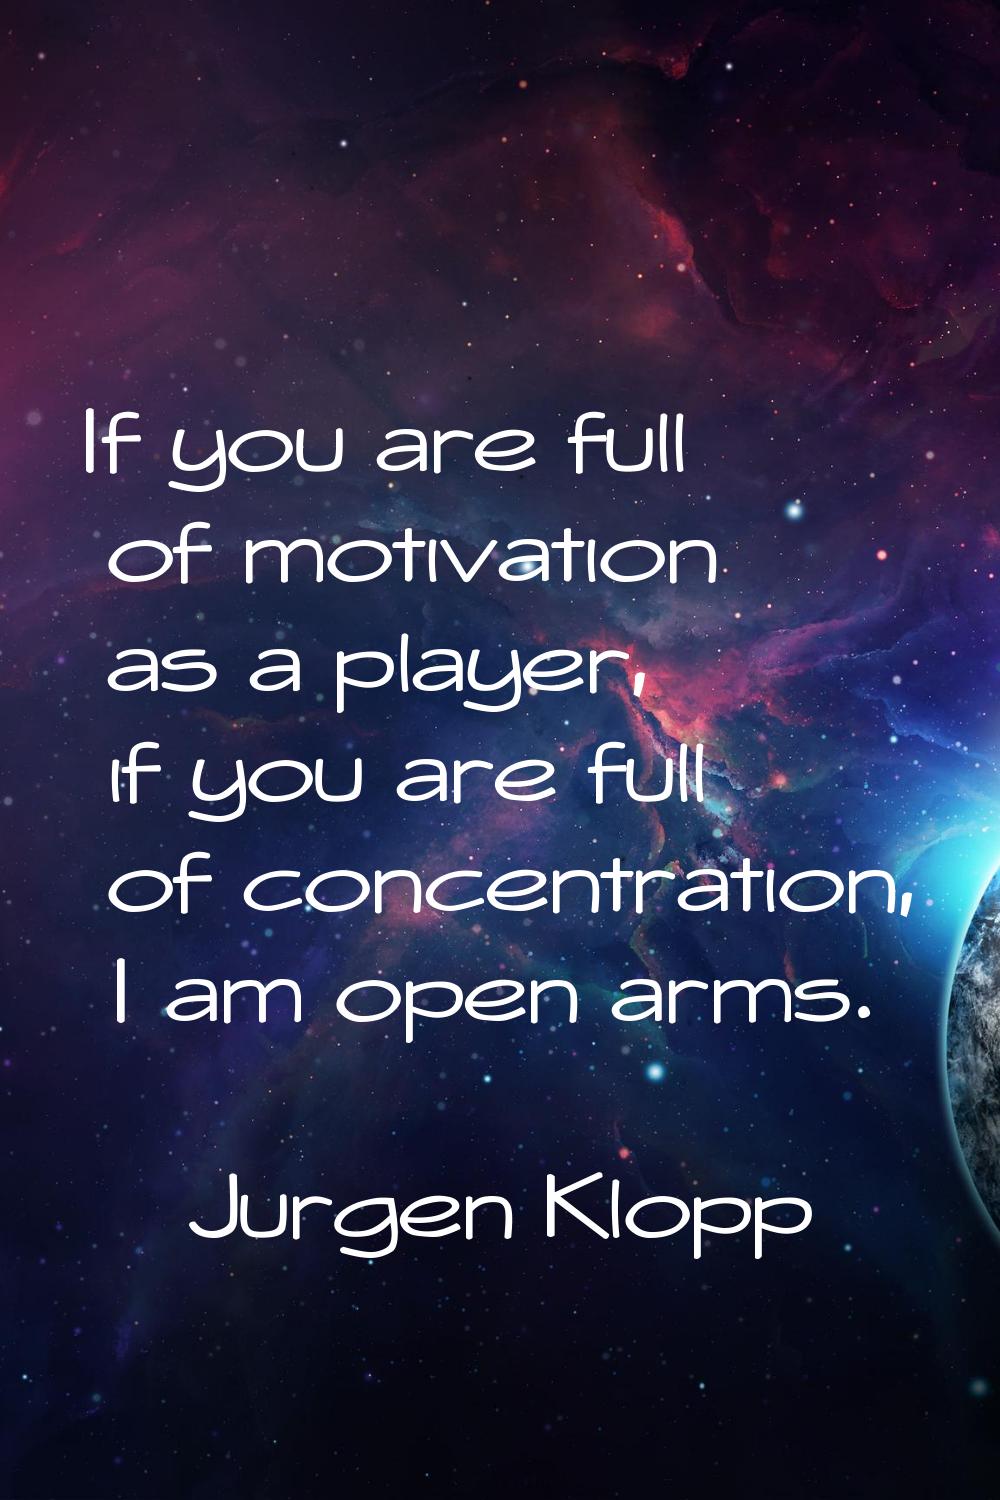 If you are full of motivation as a player, if you are full of concentration, I am open arms.